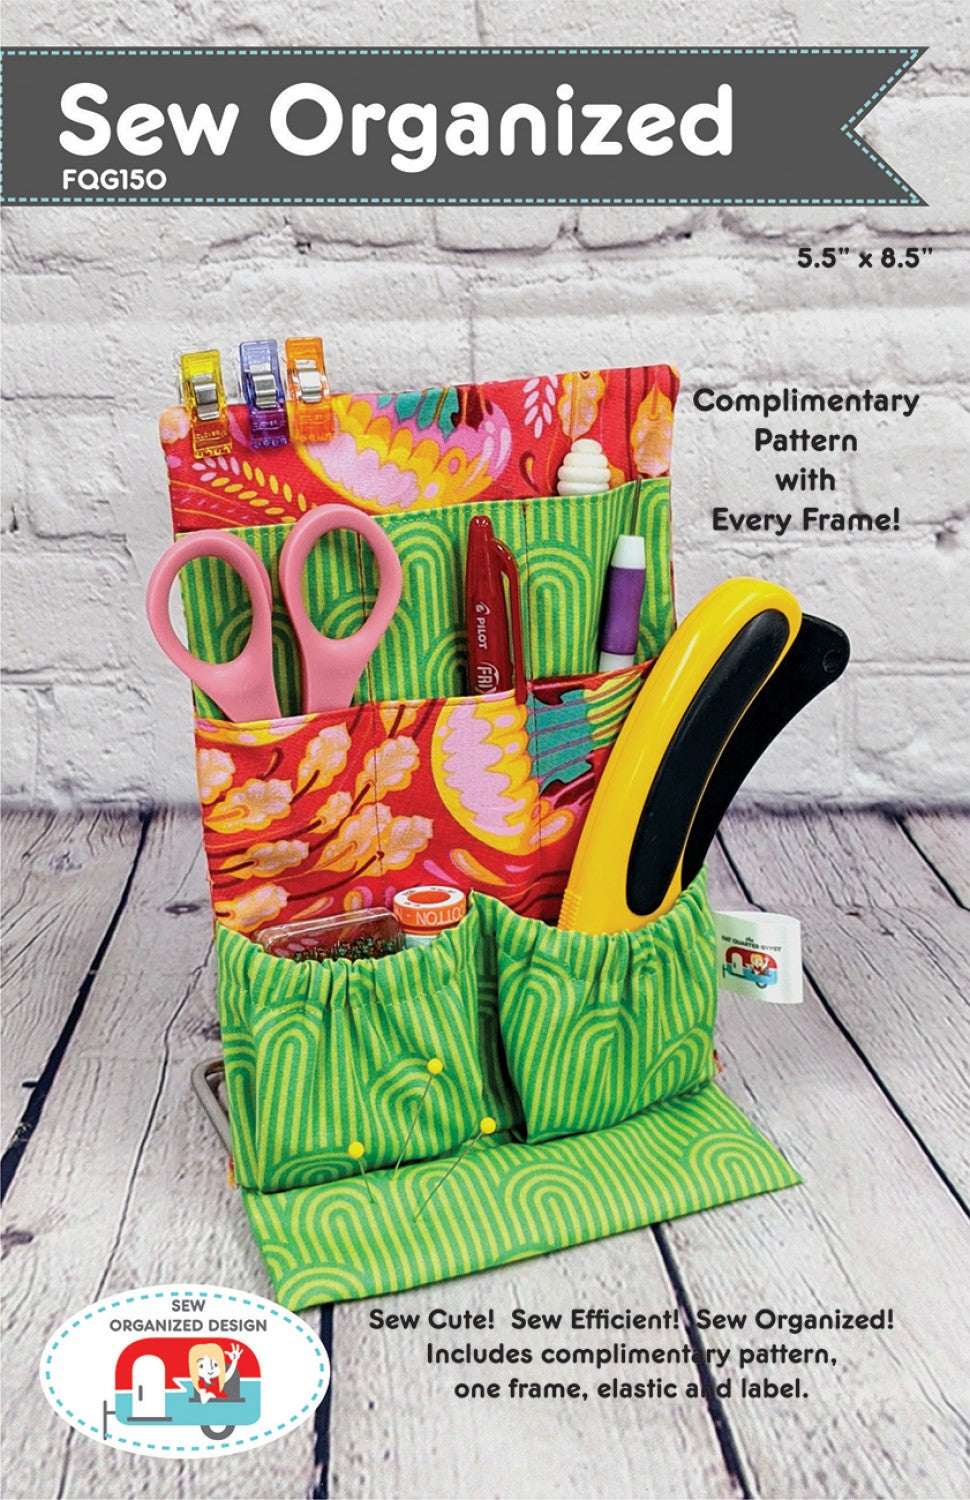 Sew Organized Storage Stand Sewing Pattern and Frame Kit by Joanne Hillestad for Sew Organized Designs